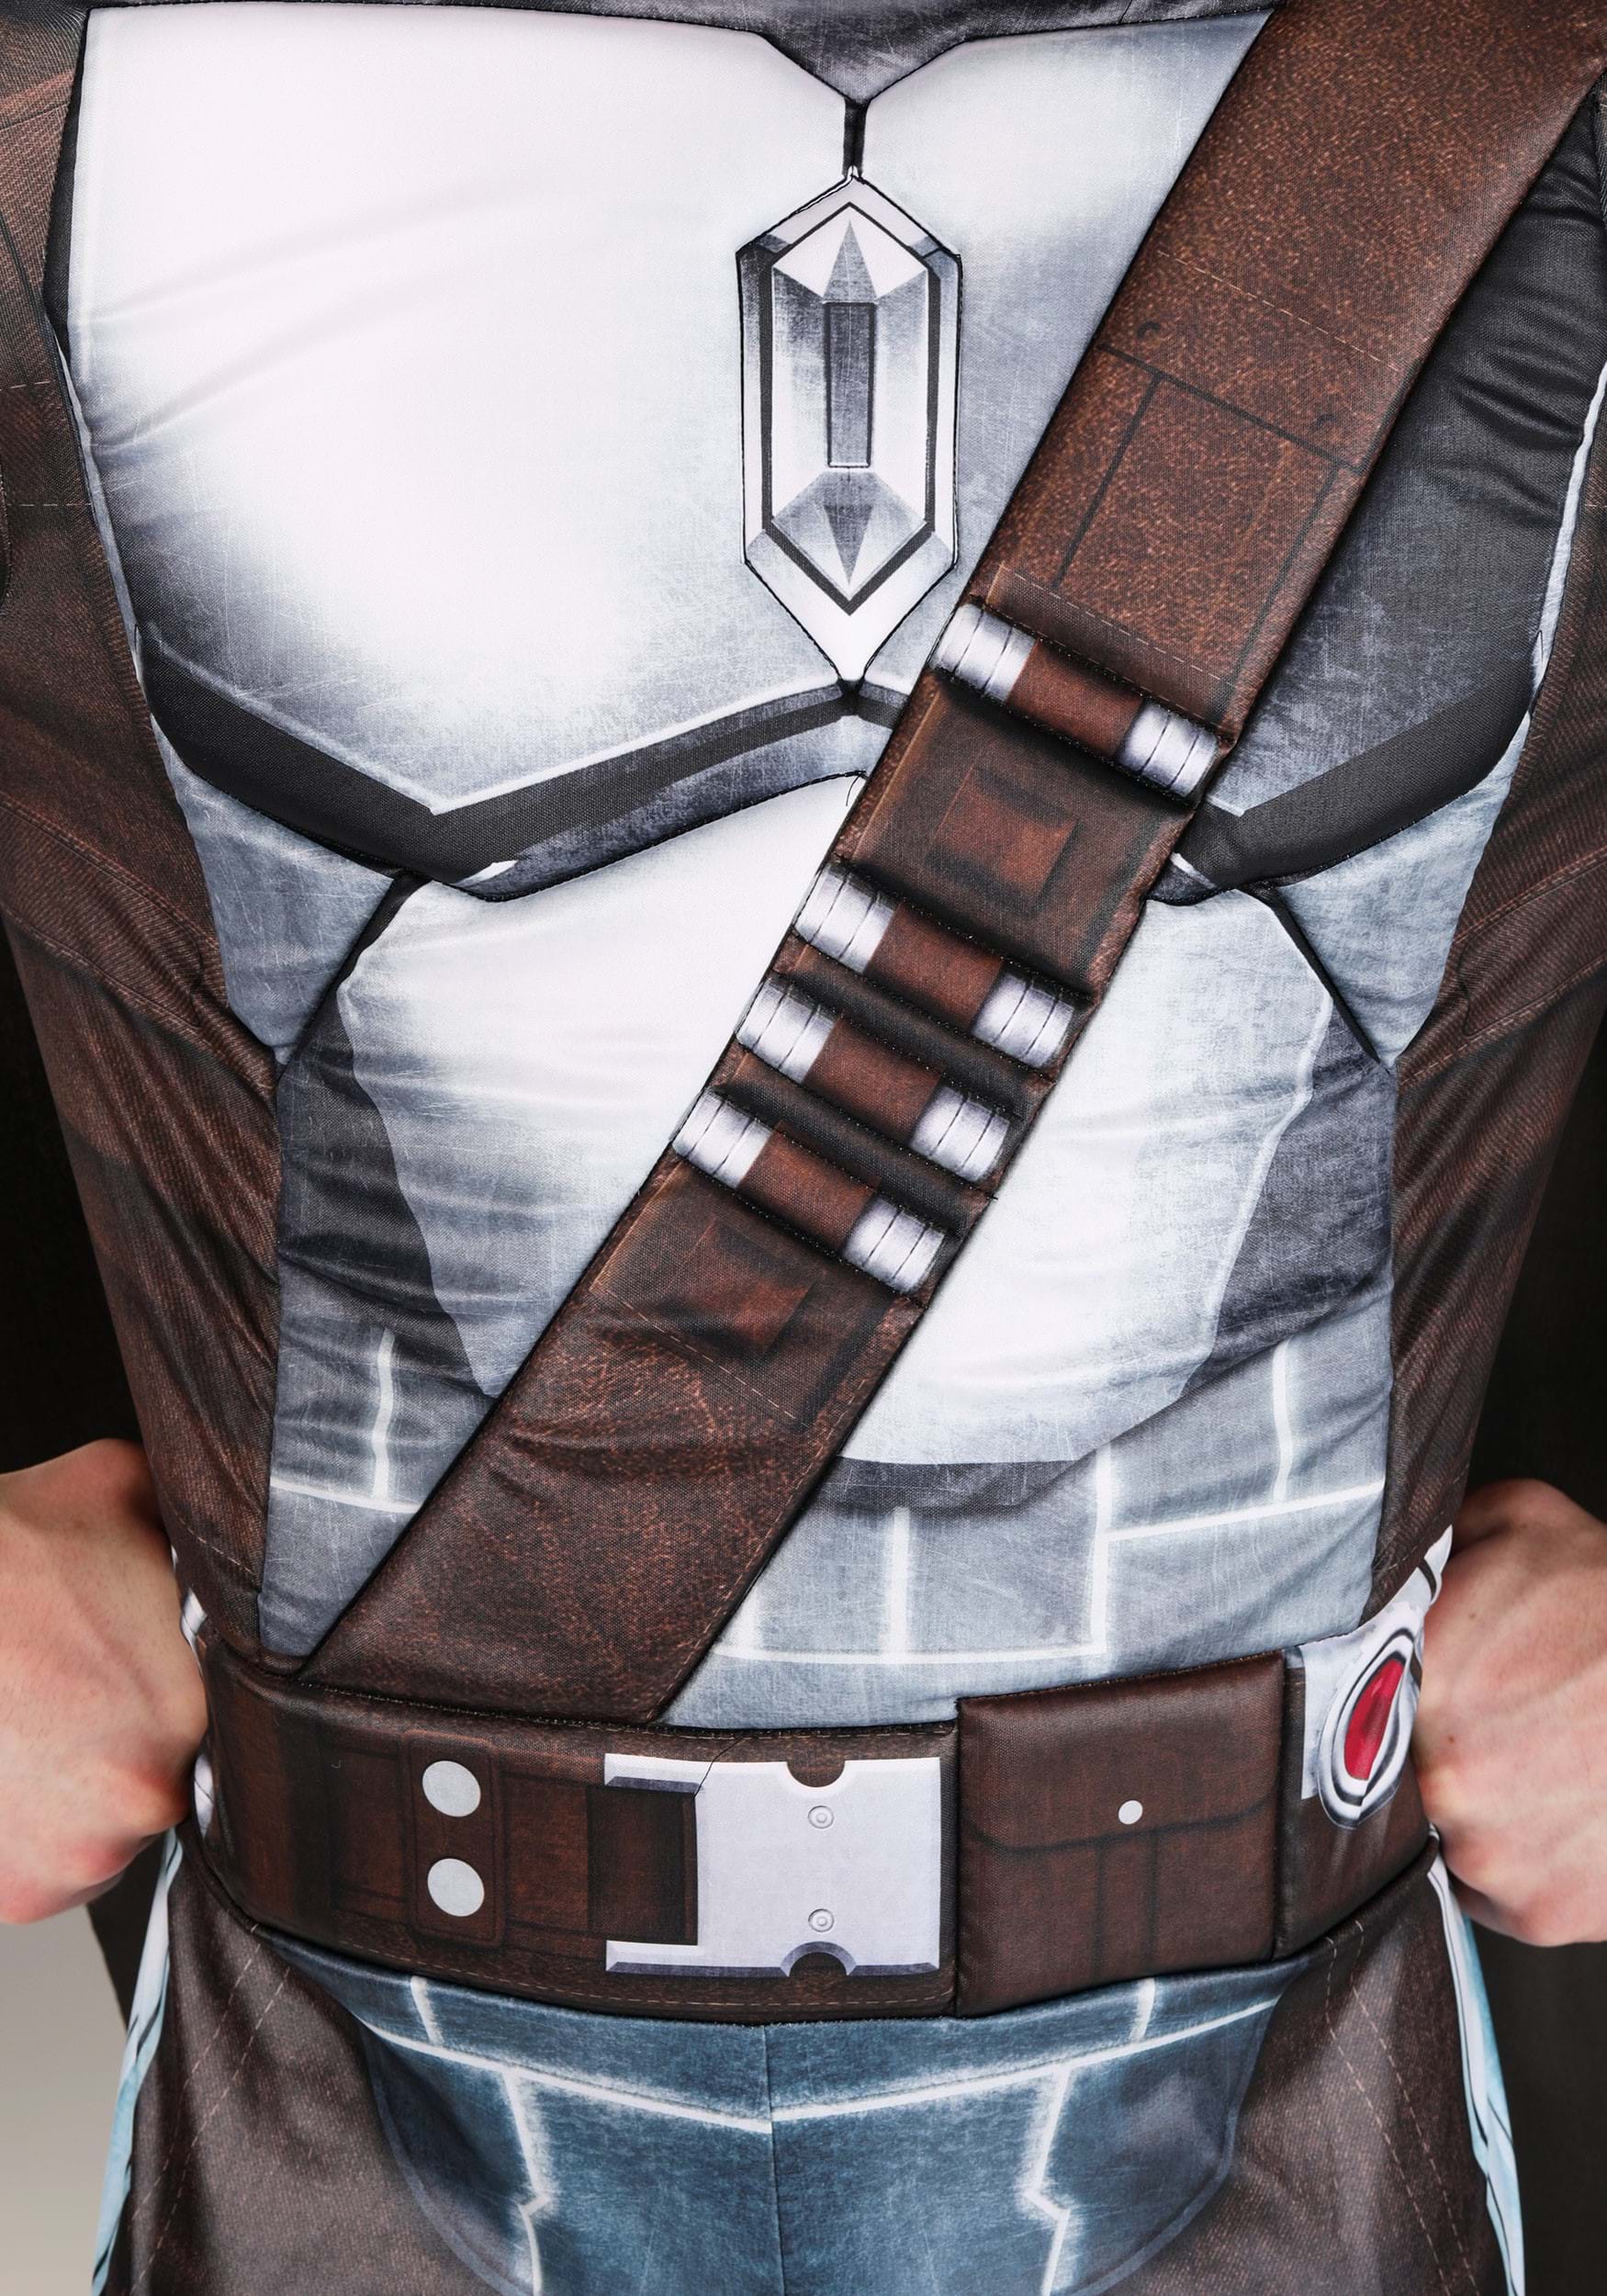 The Mandalorian Costume For Adults